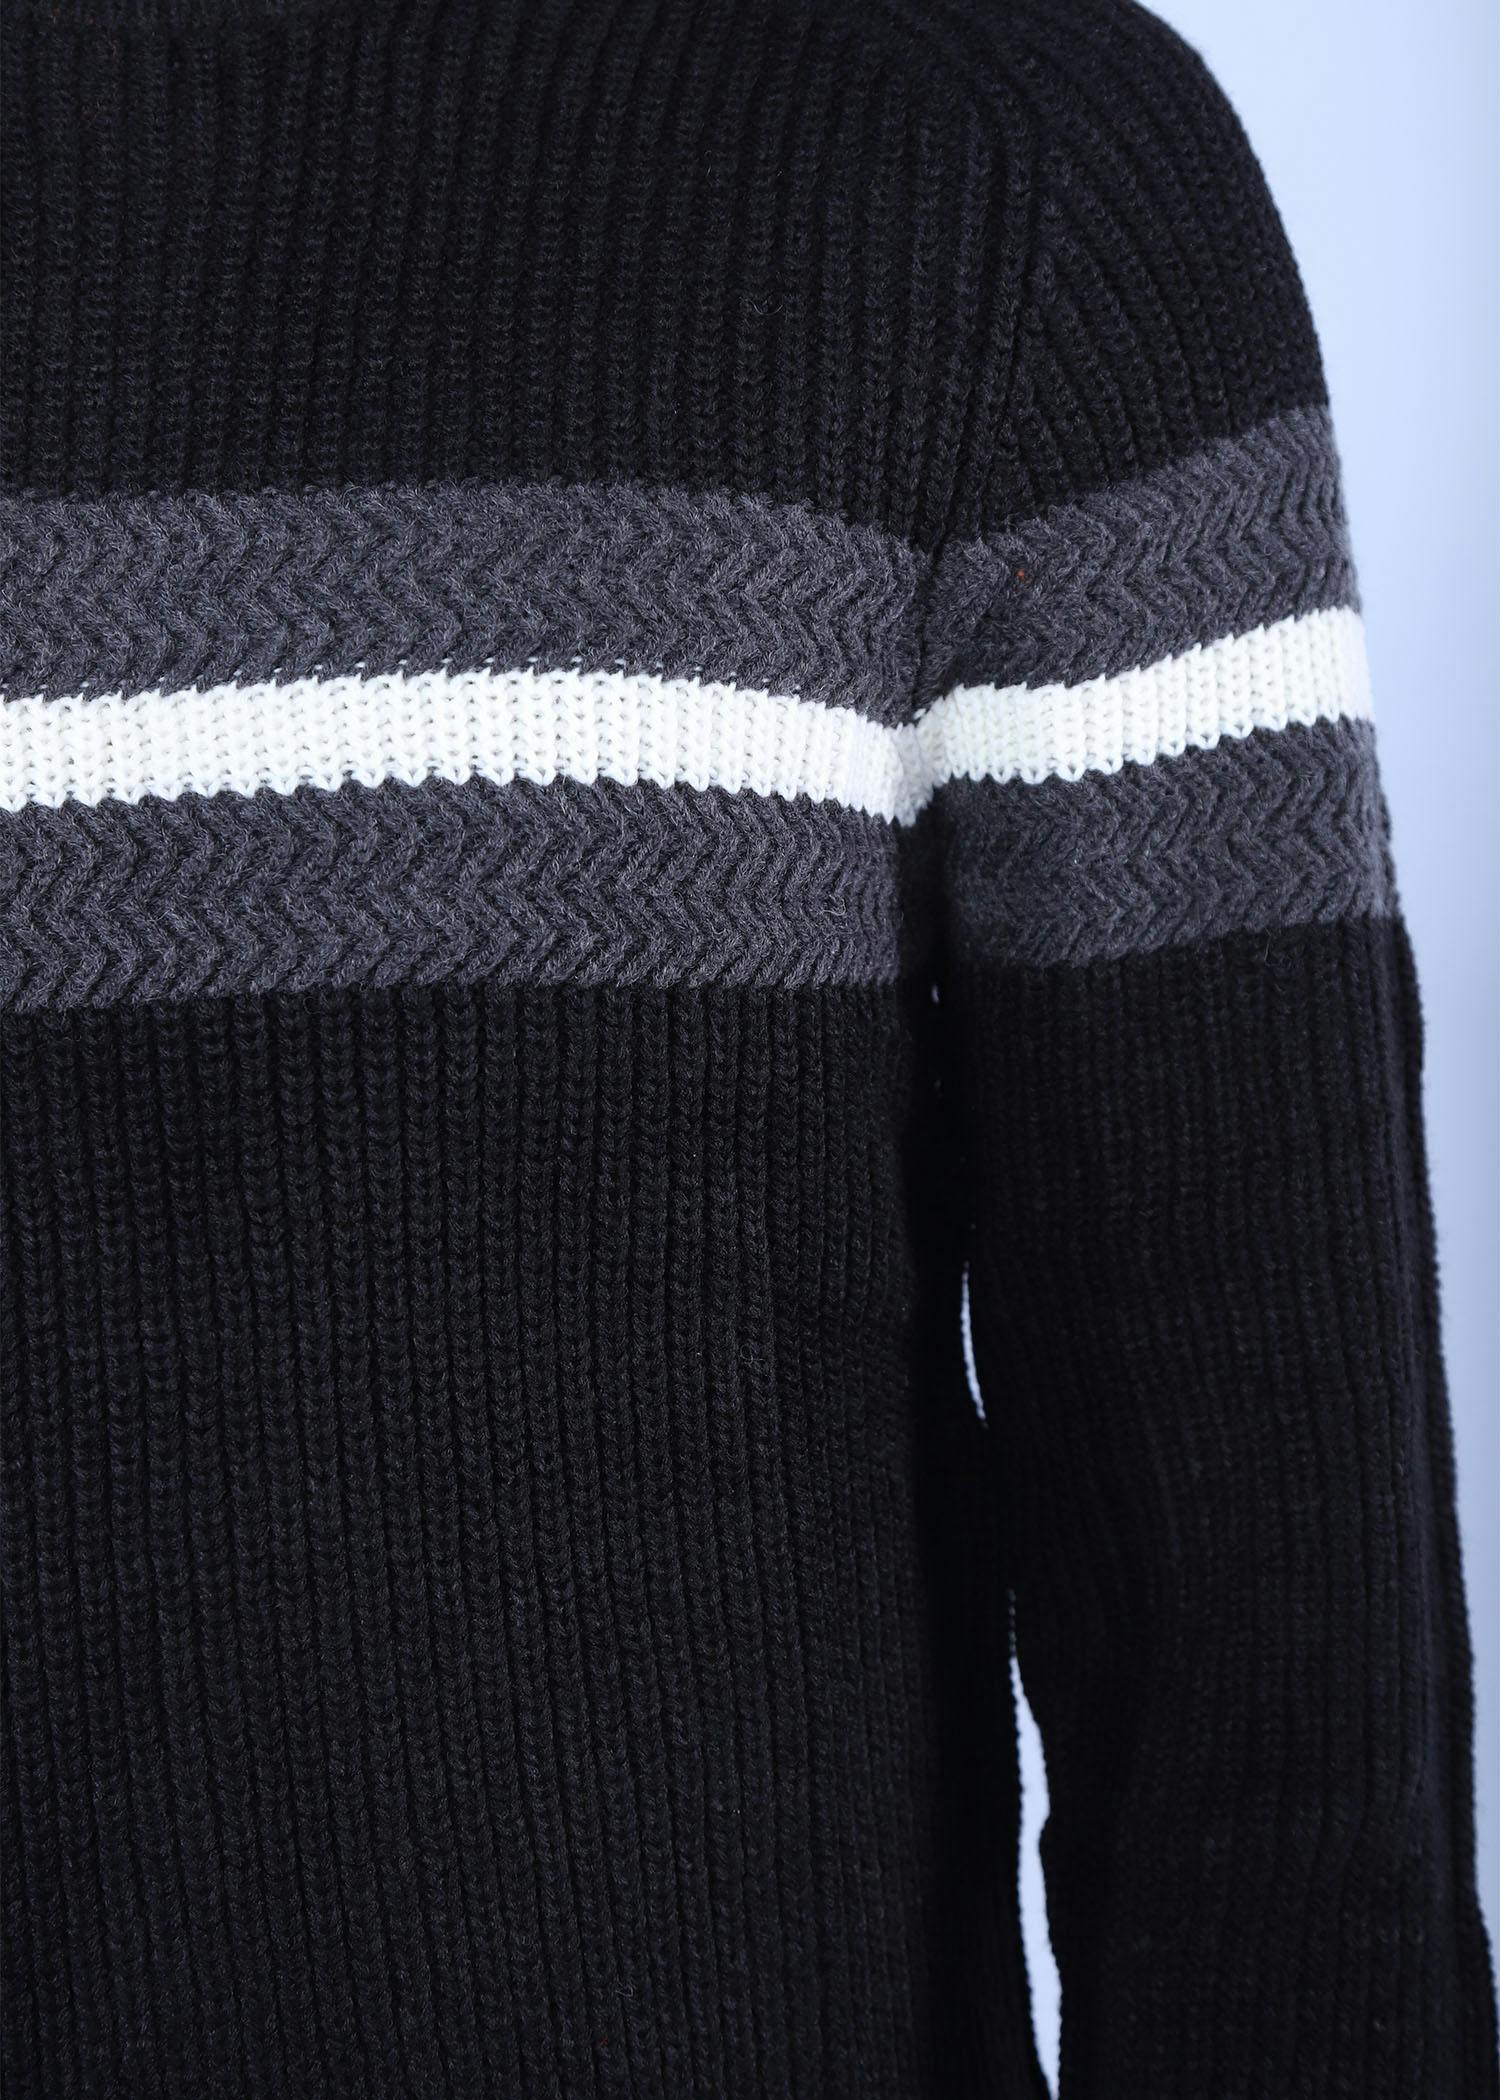 hillstar i sweater black color close front view